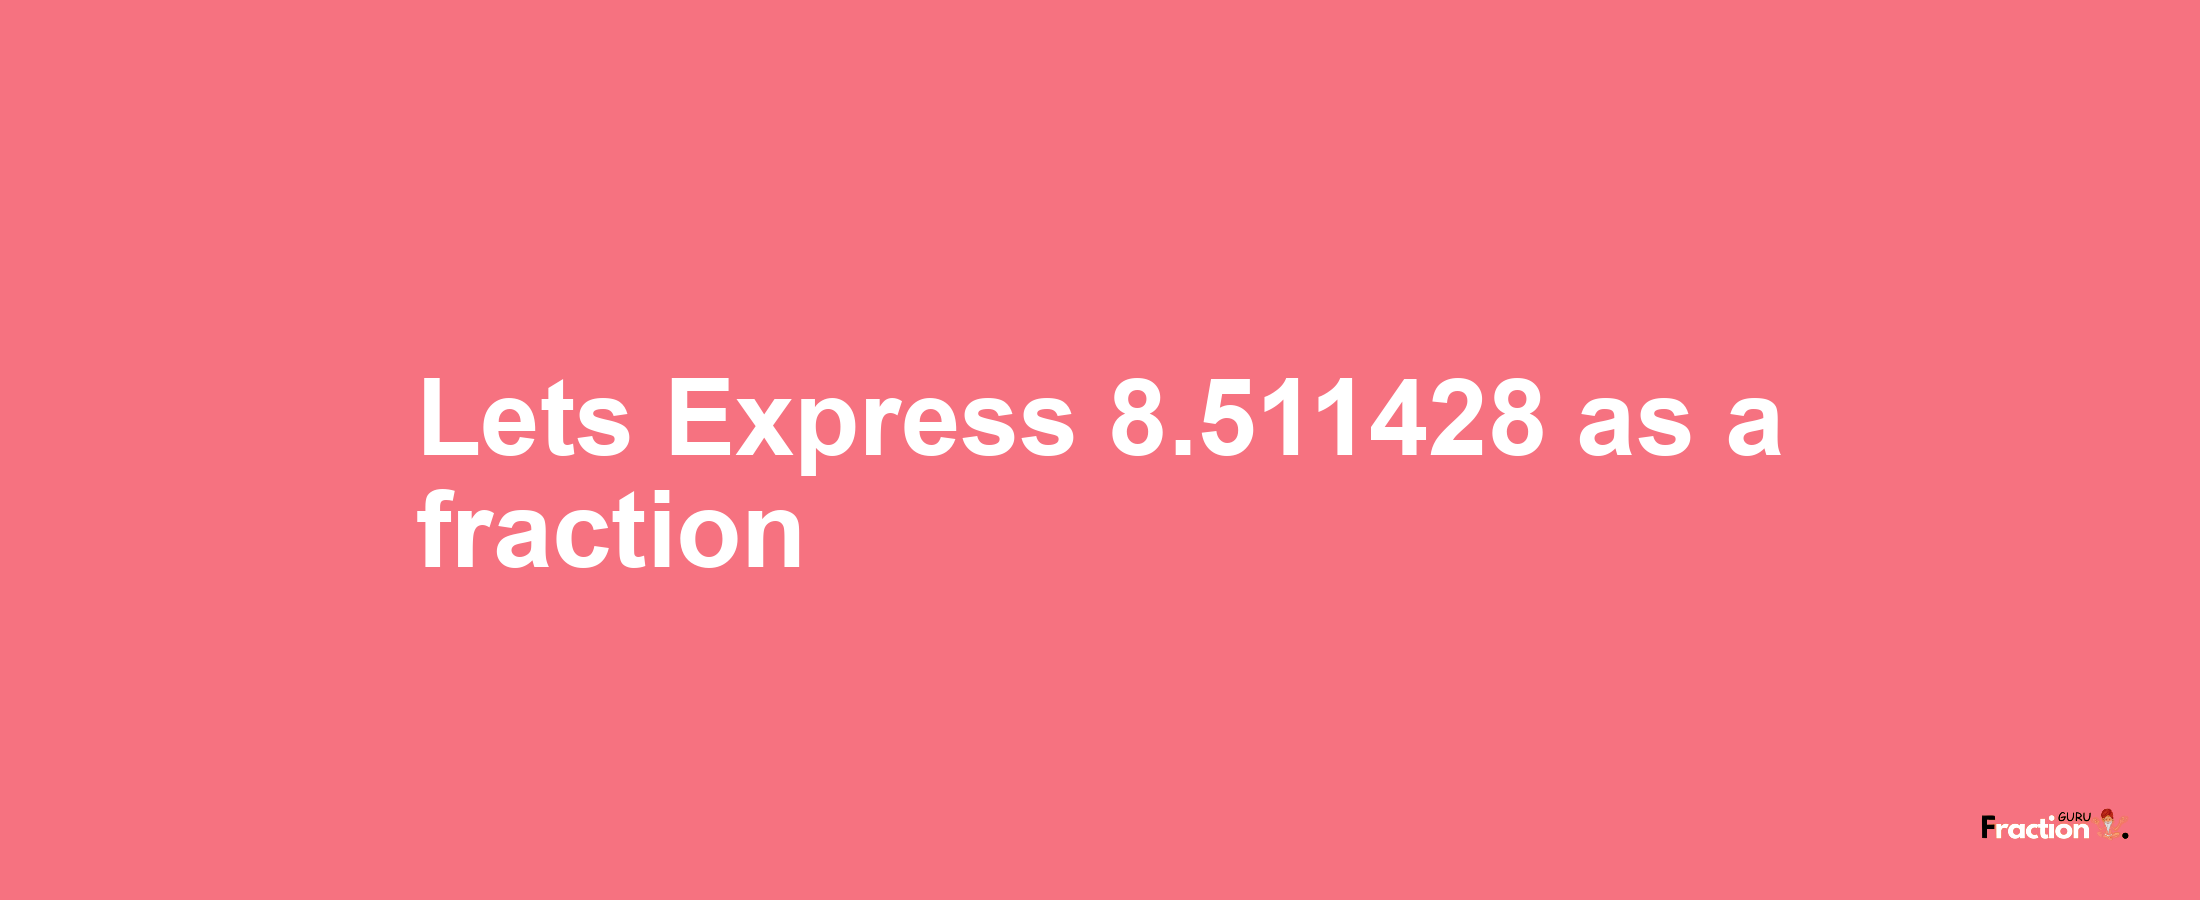 Lets Express 8.511428 as afraction